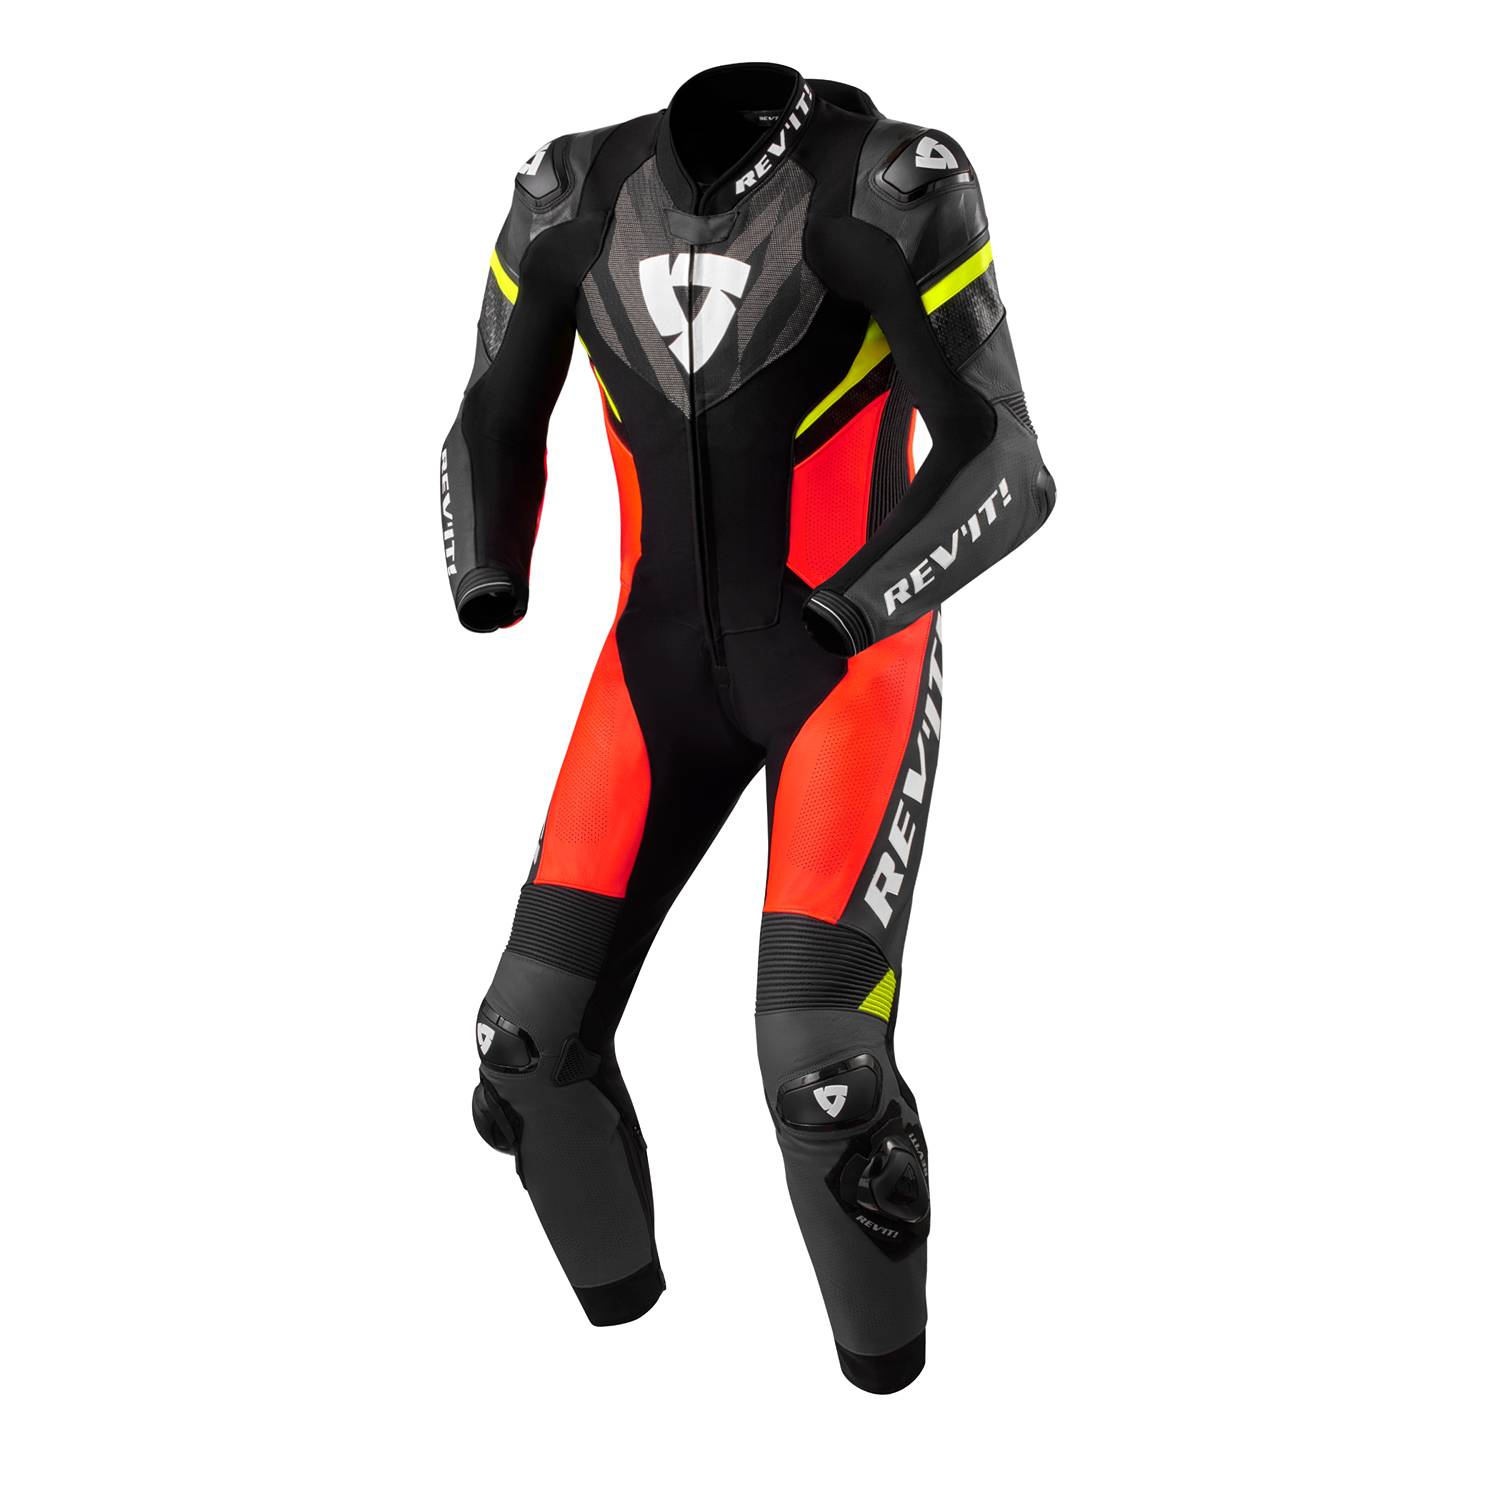 Image of REV'IT! Hyperspeed 2 One Piece Suit Black Neon Red Size 50 ID 8700001359795